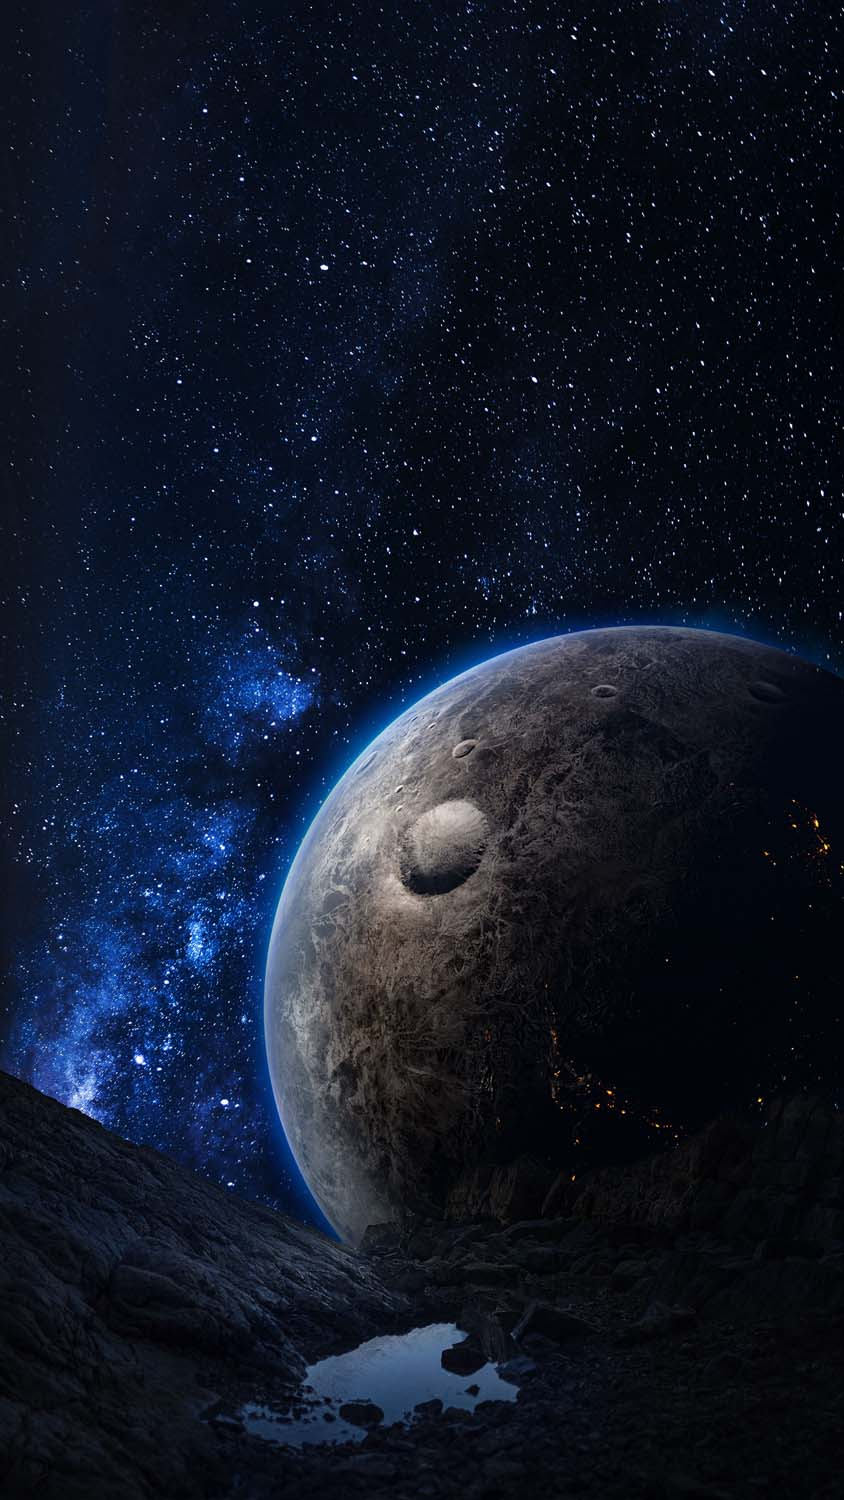 Space View IPhone Wallpaper HD  IPhone Wallpapers